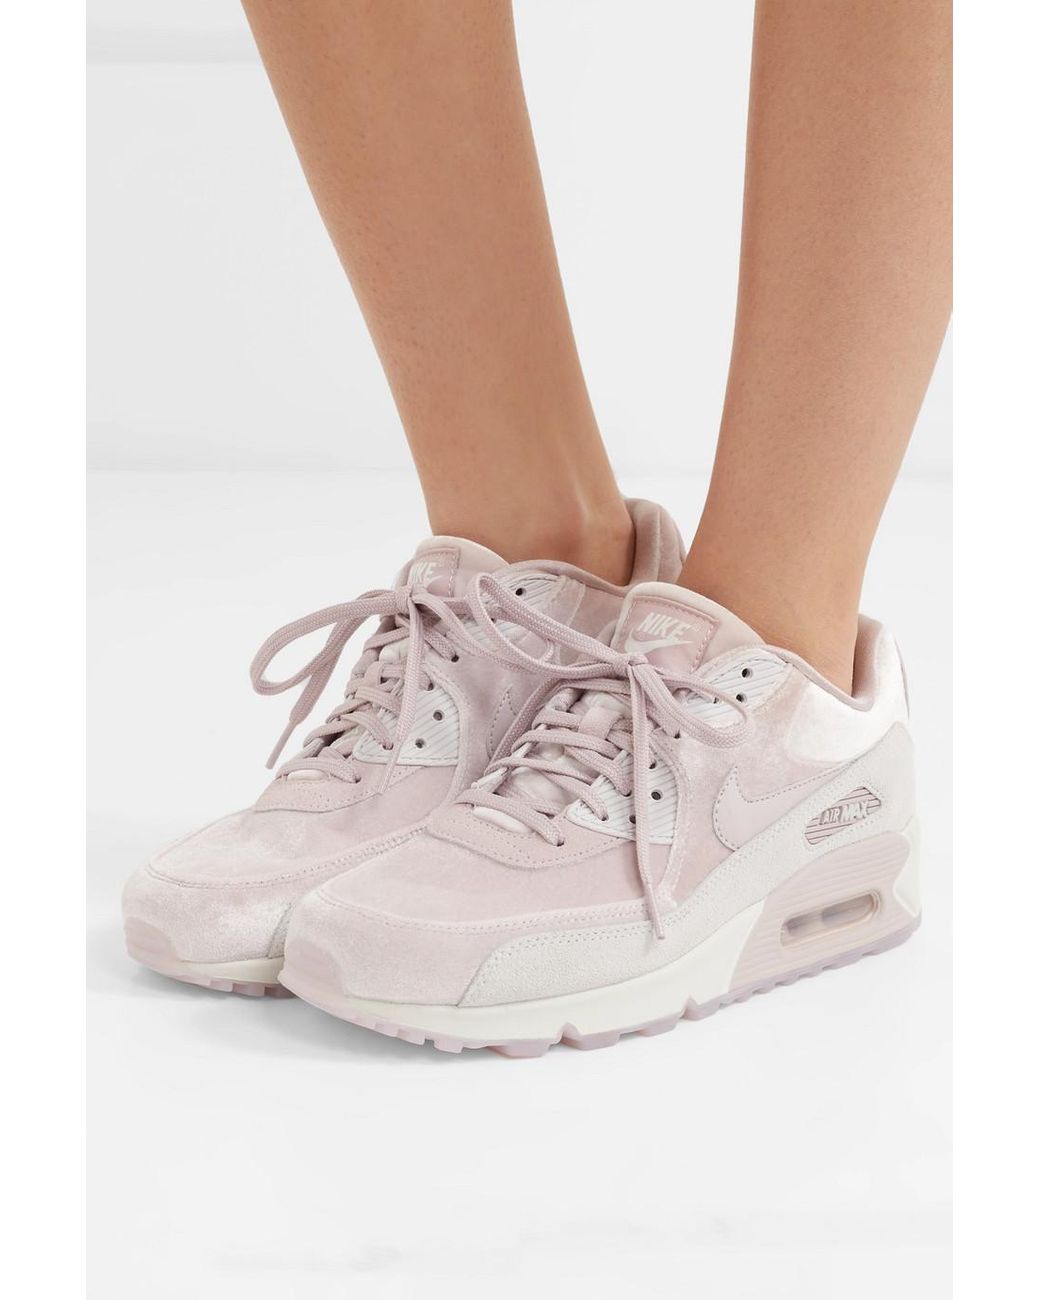 Mortal spanning kijk in Nike Air Max 90 Lx Velvet And Suede Sneakers in Pink | Lyst